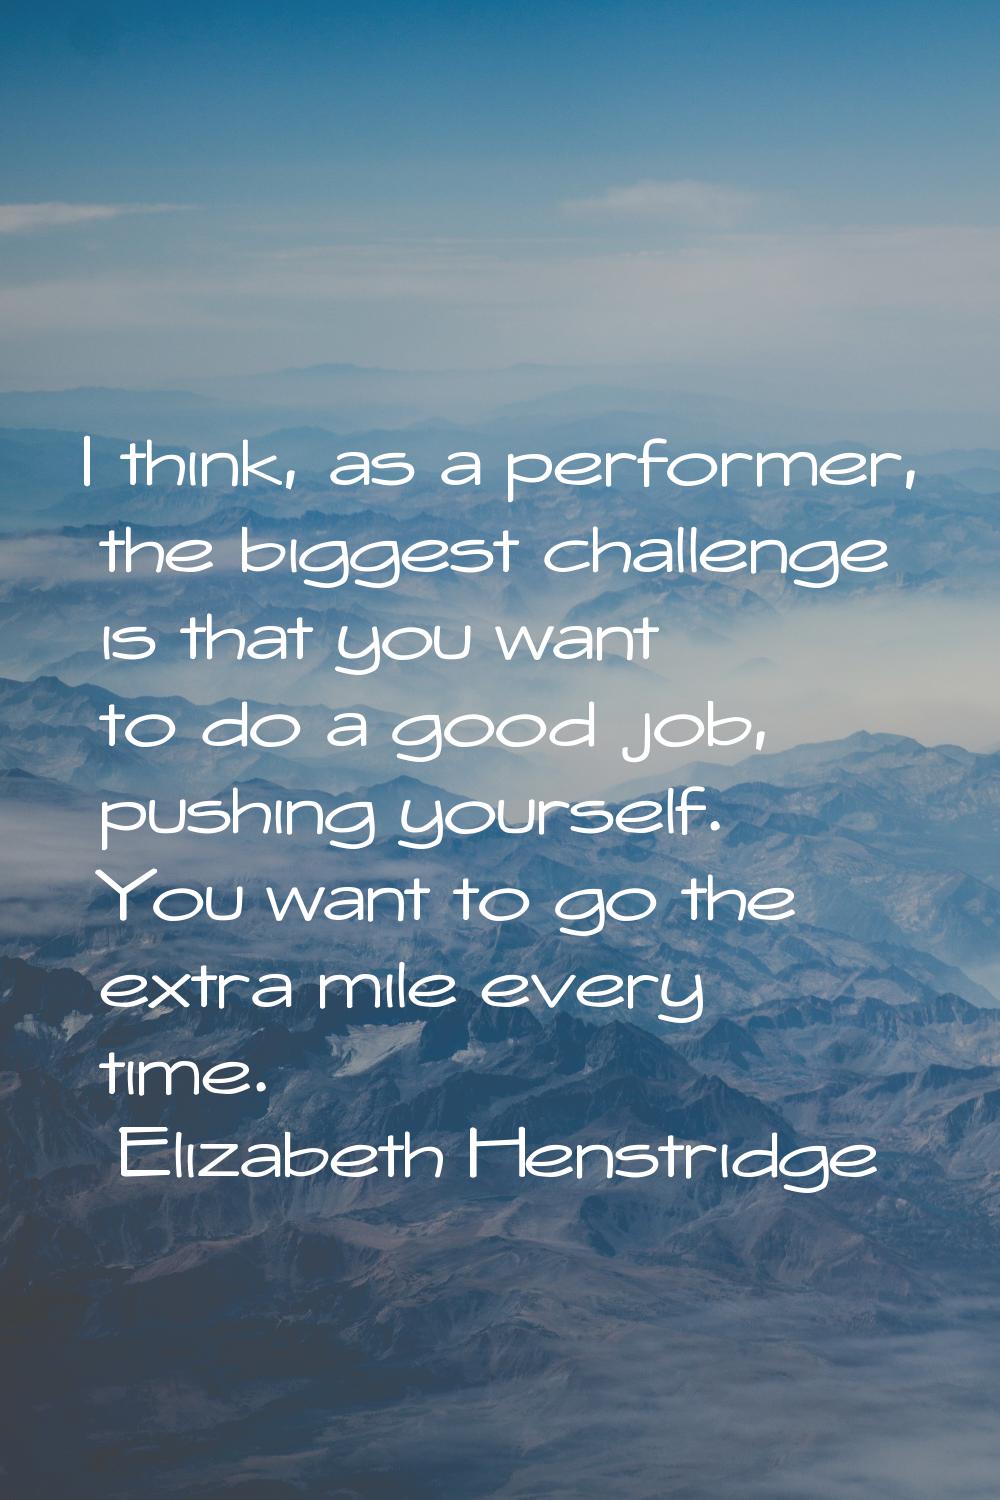 I think, as a performer, the biggest challenge is that you want to do a good job, pushing yourself.